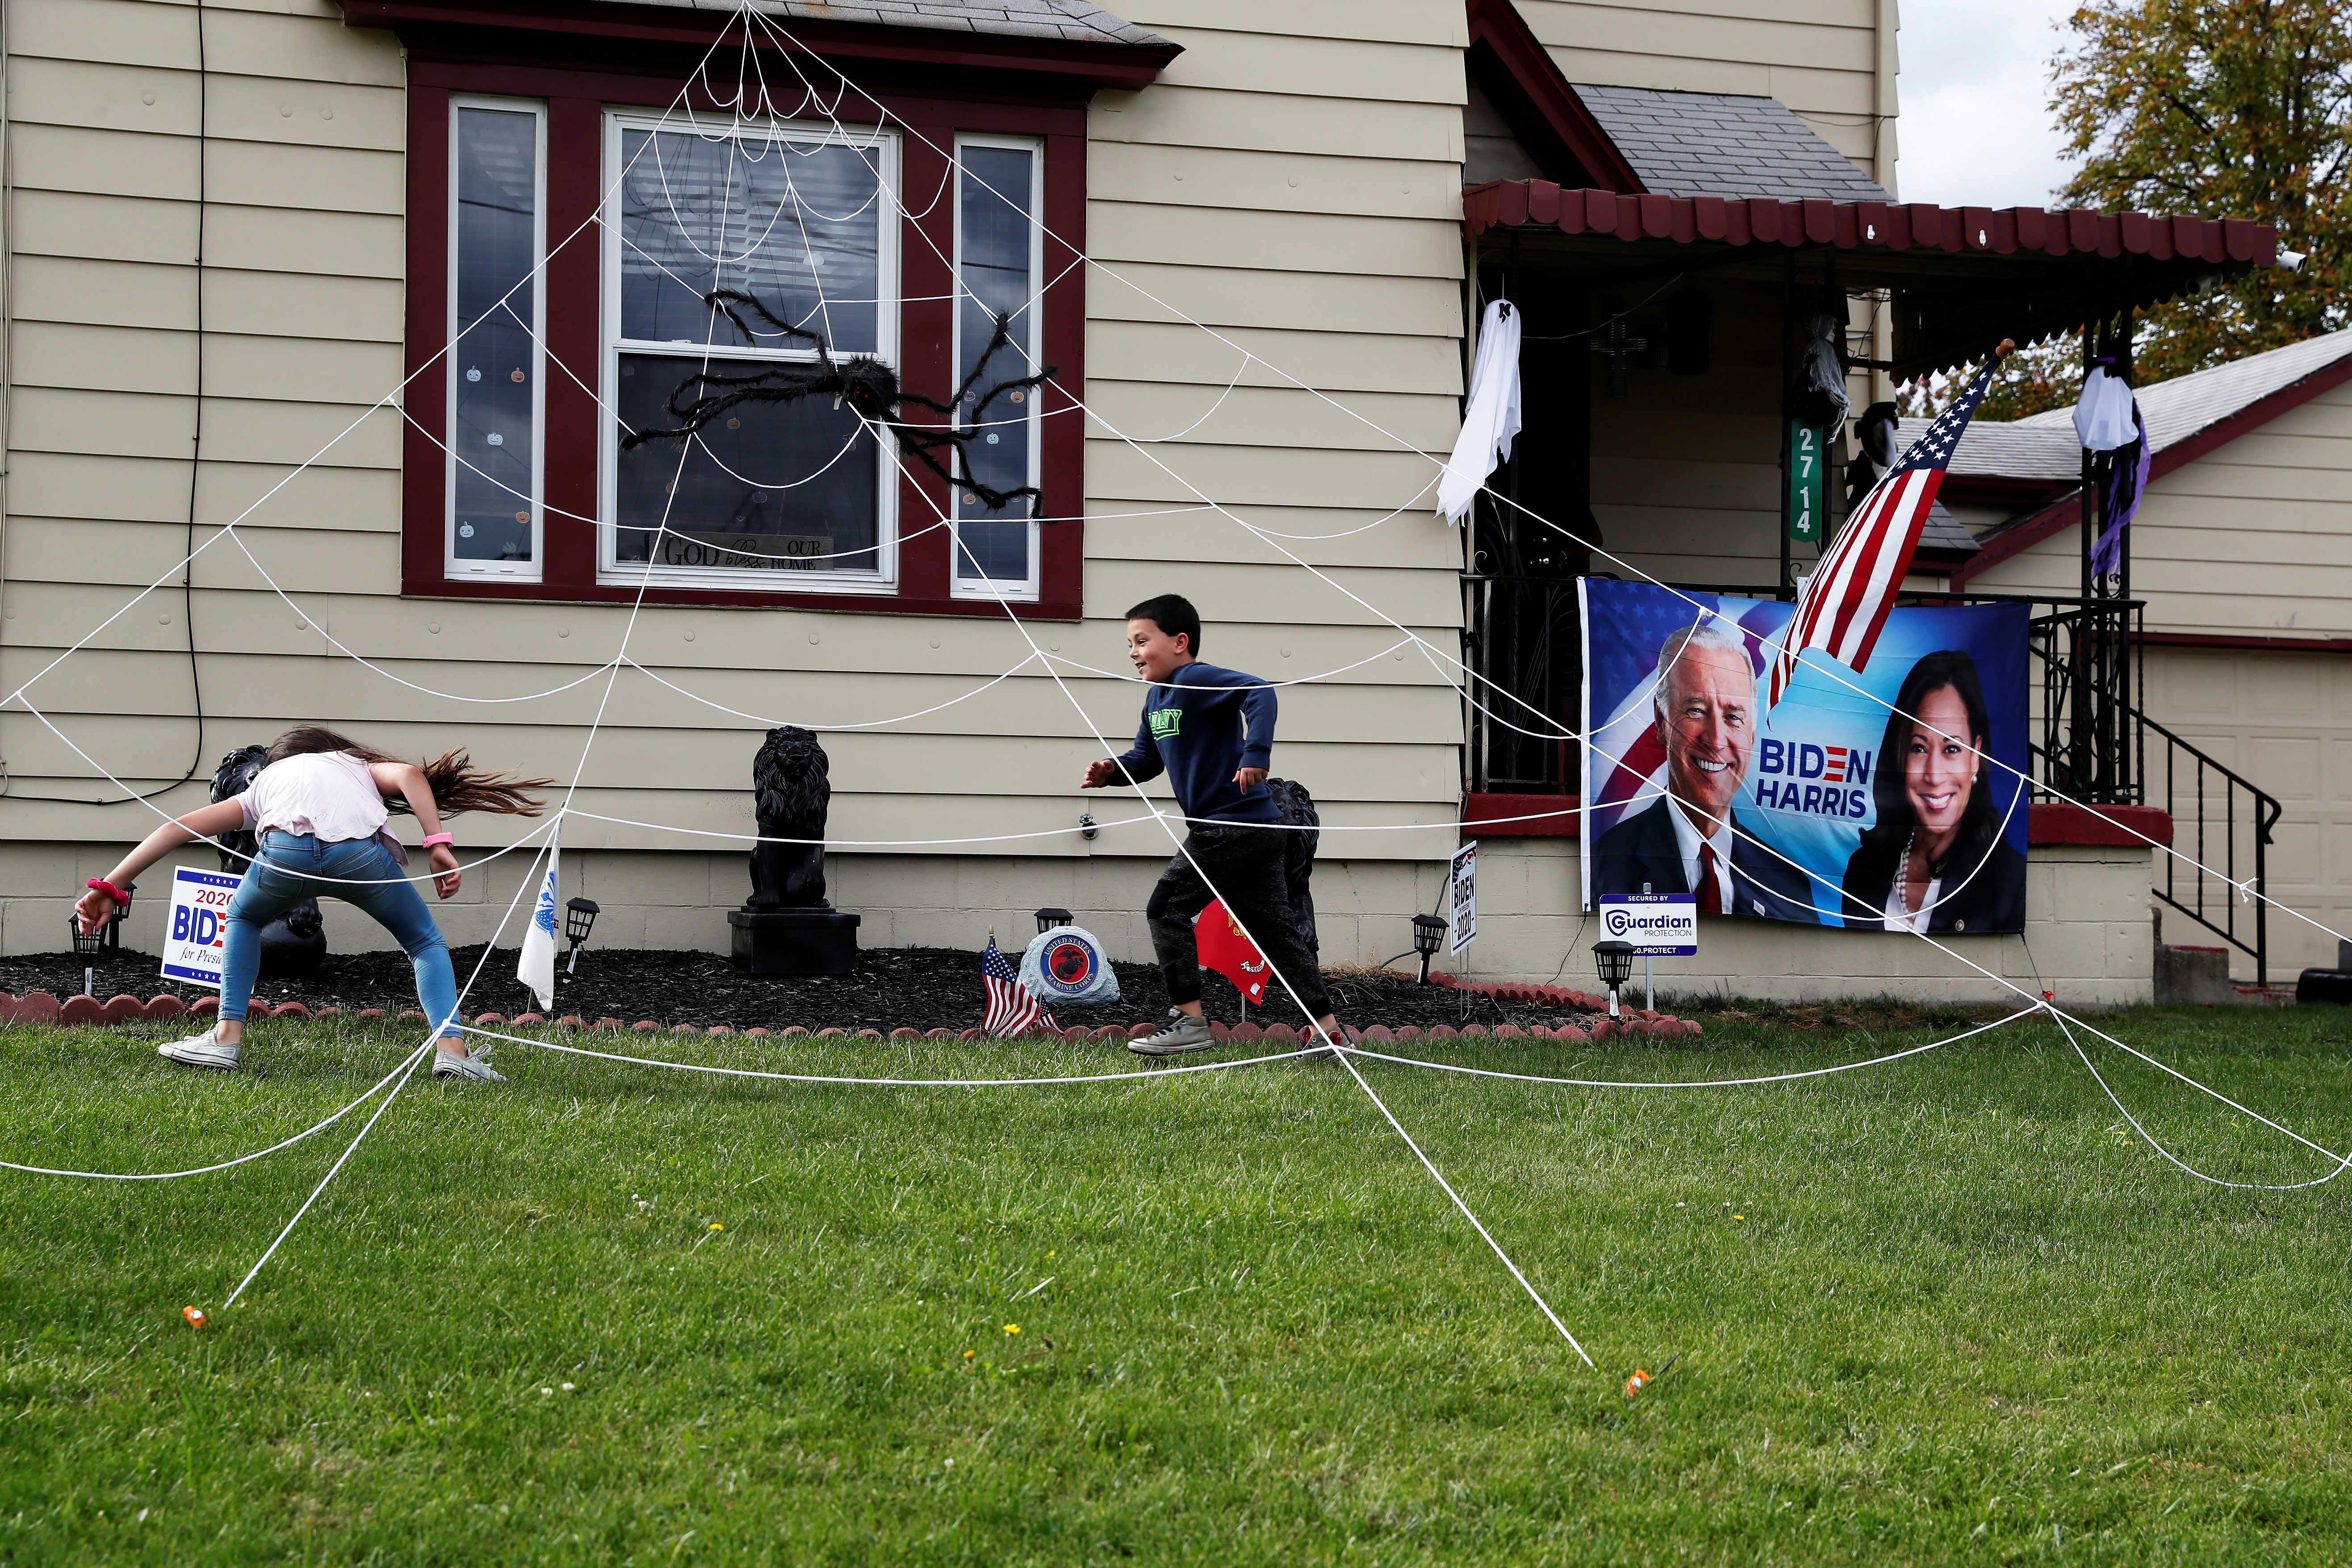 Some homes mix Halloween decorations with political messages